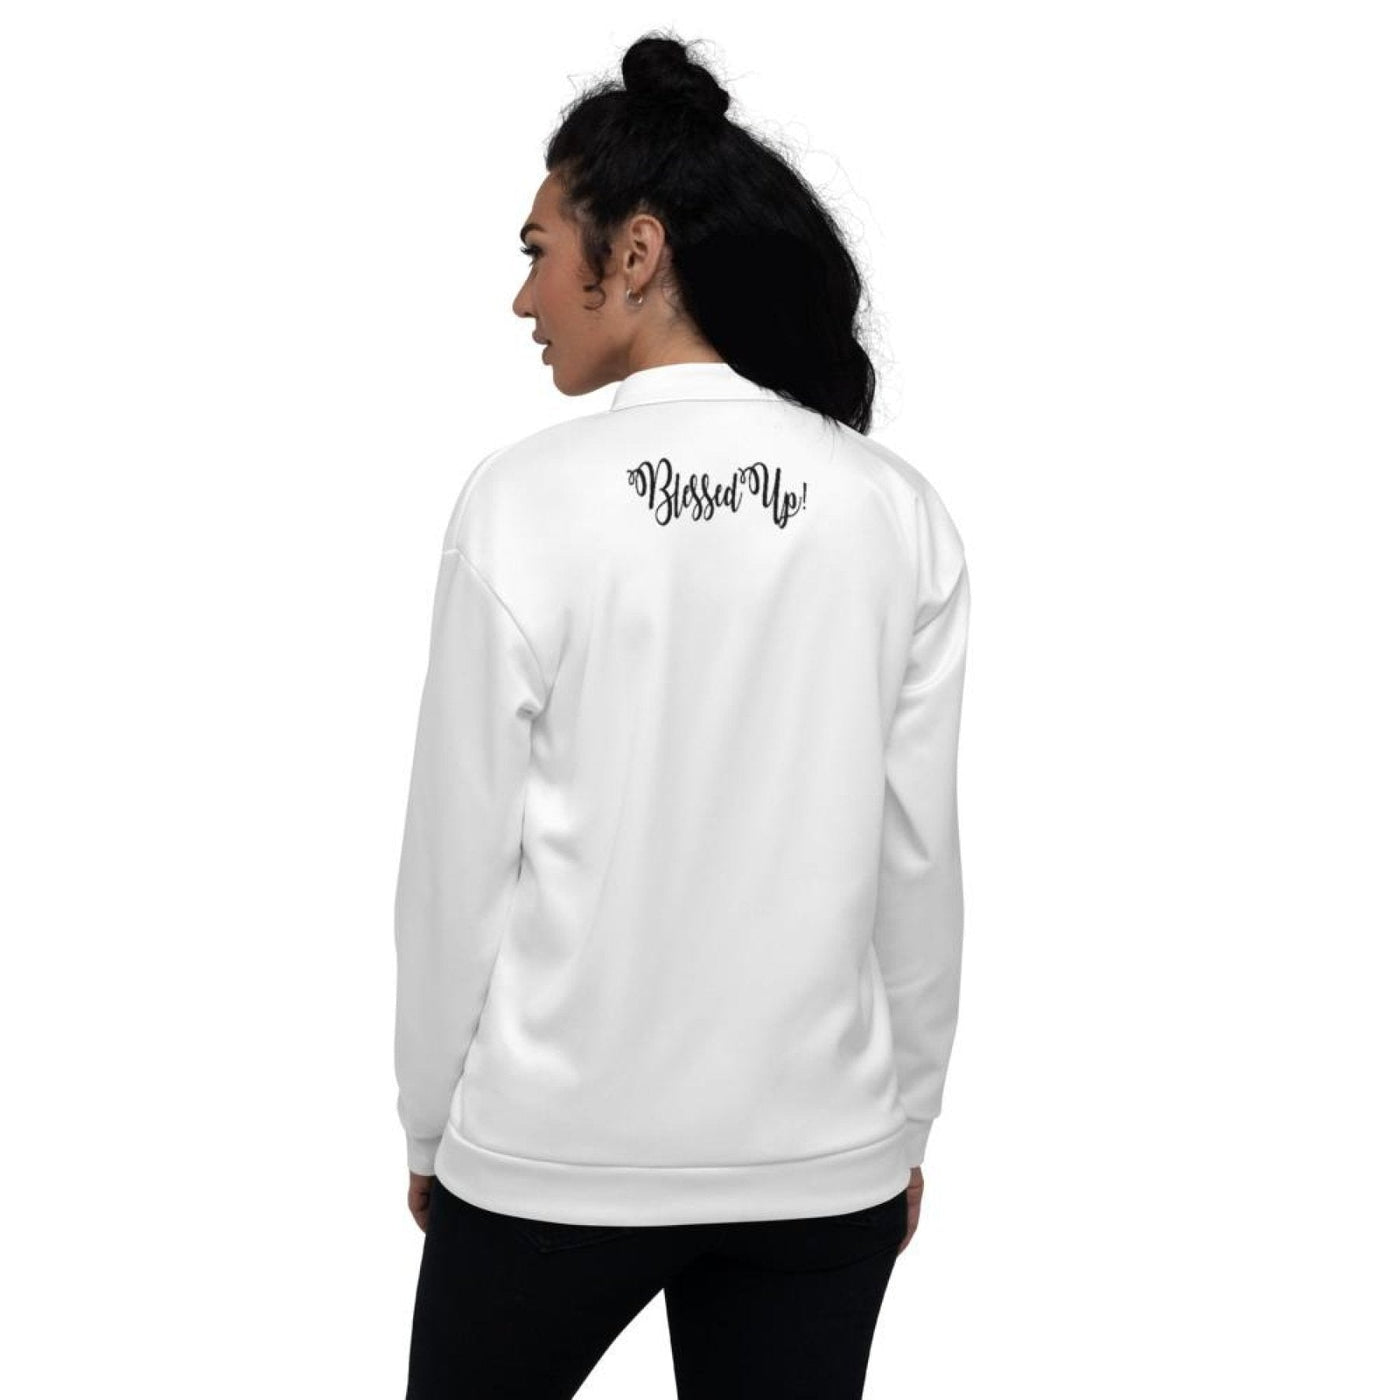 Womens Jacket - Blessed Up Graphic Text Bomber Jacket - Womens | Jackets |